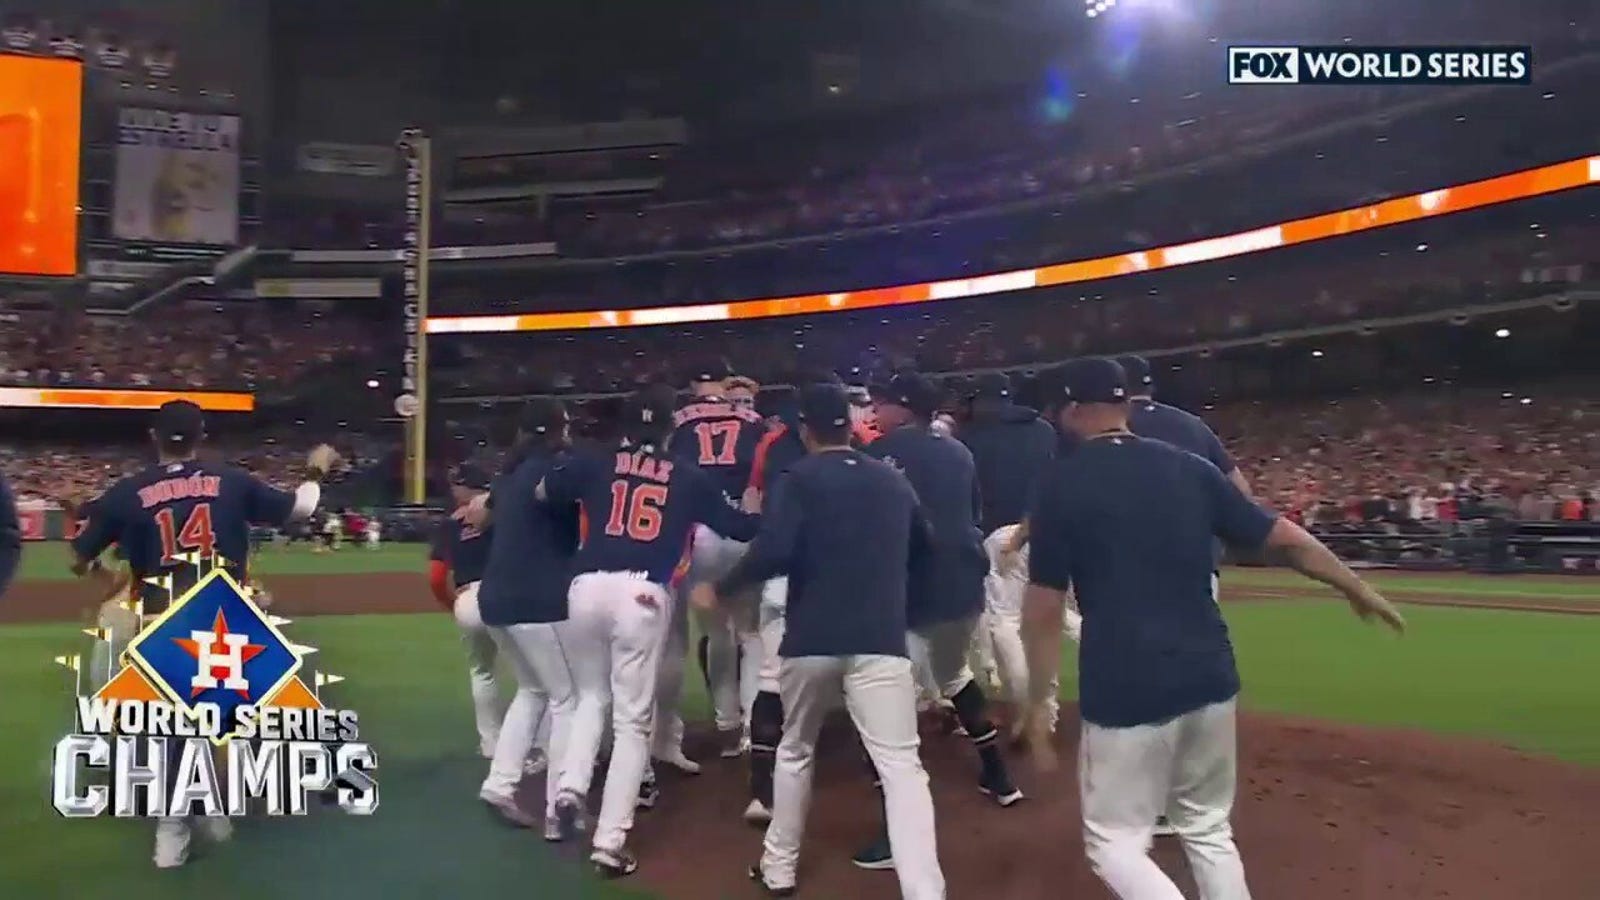 The Astros celebrate the title